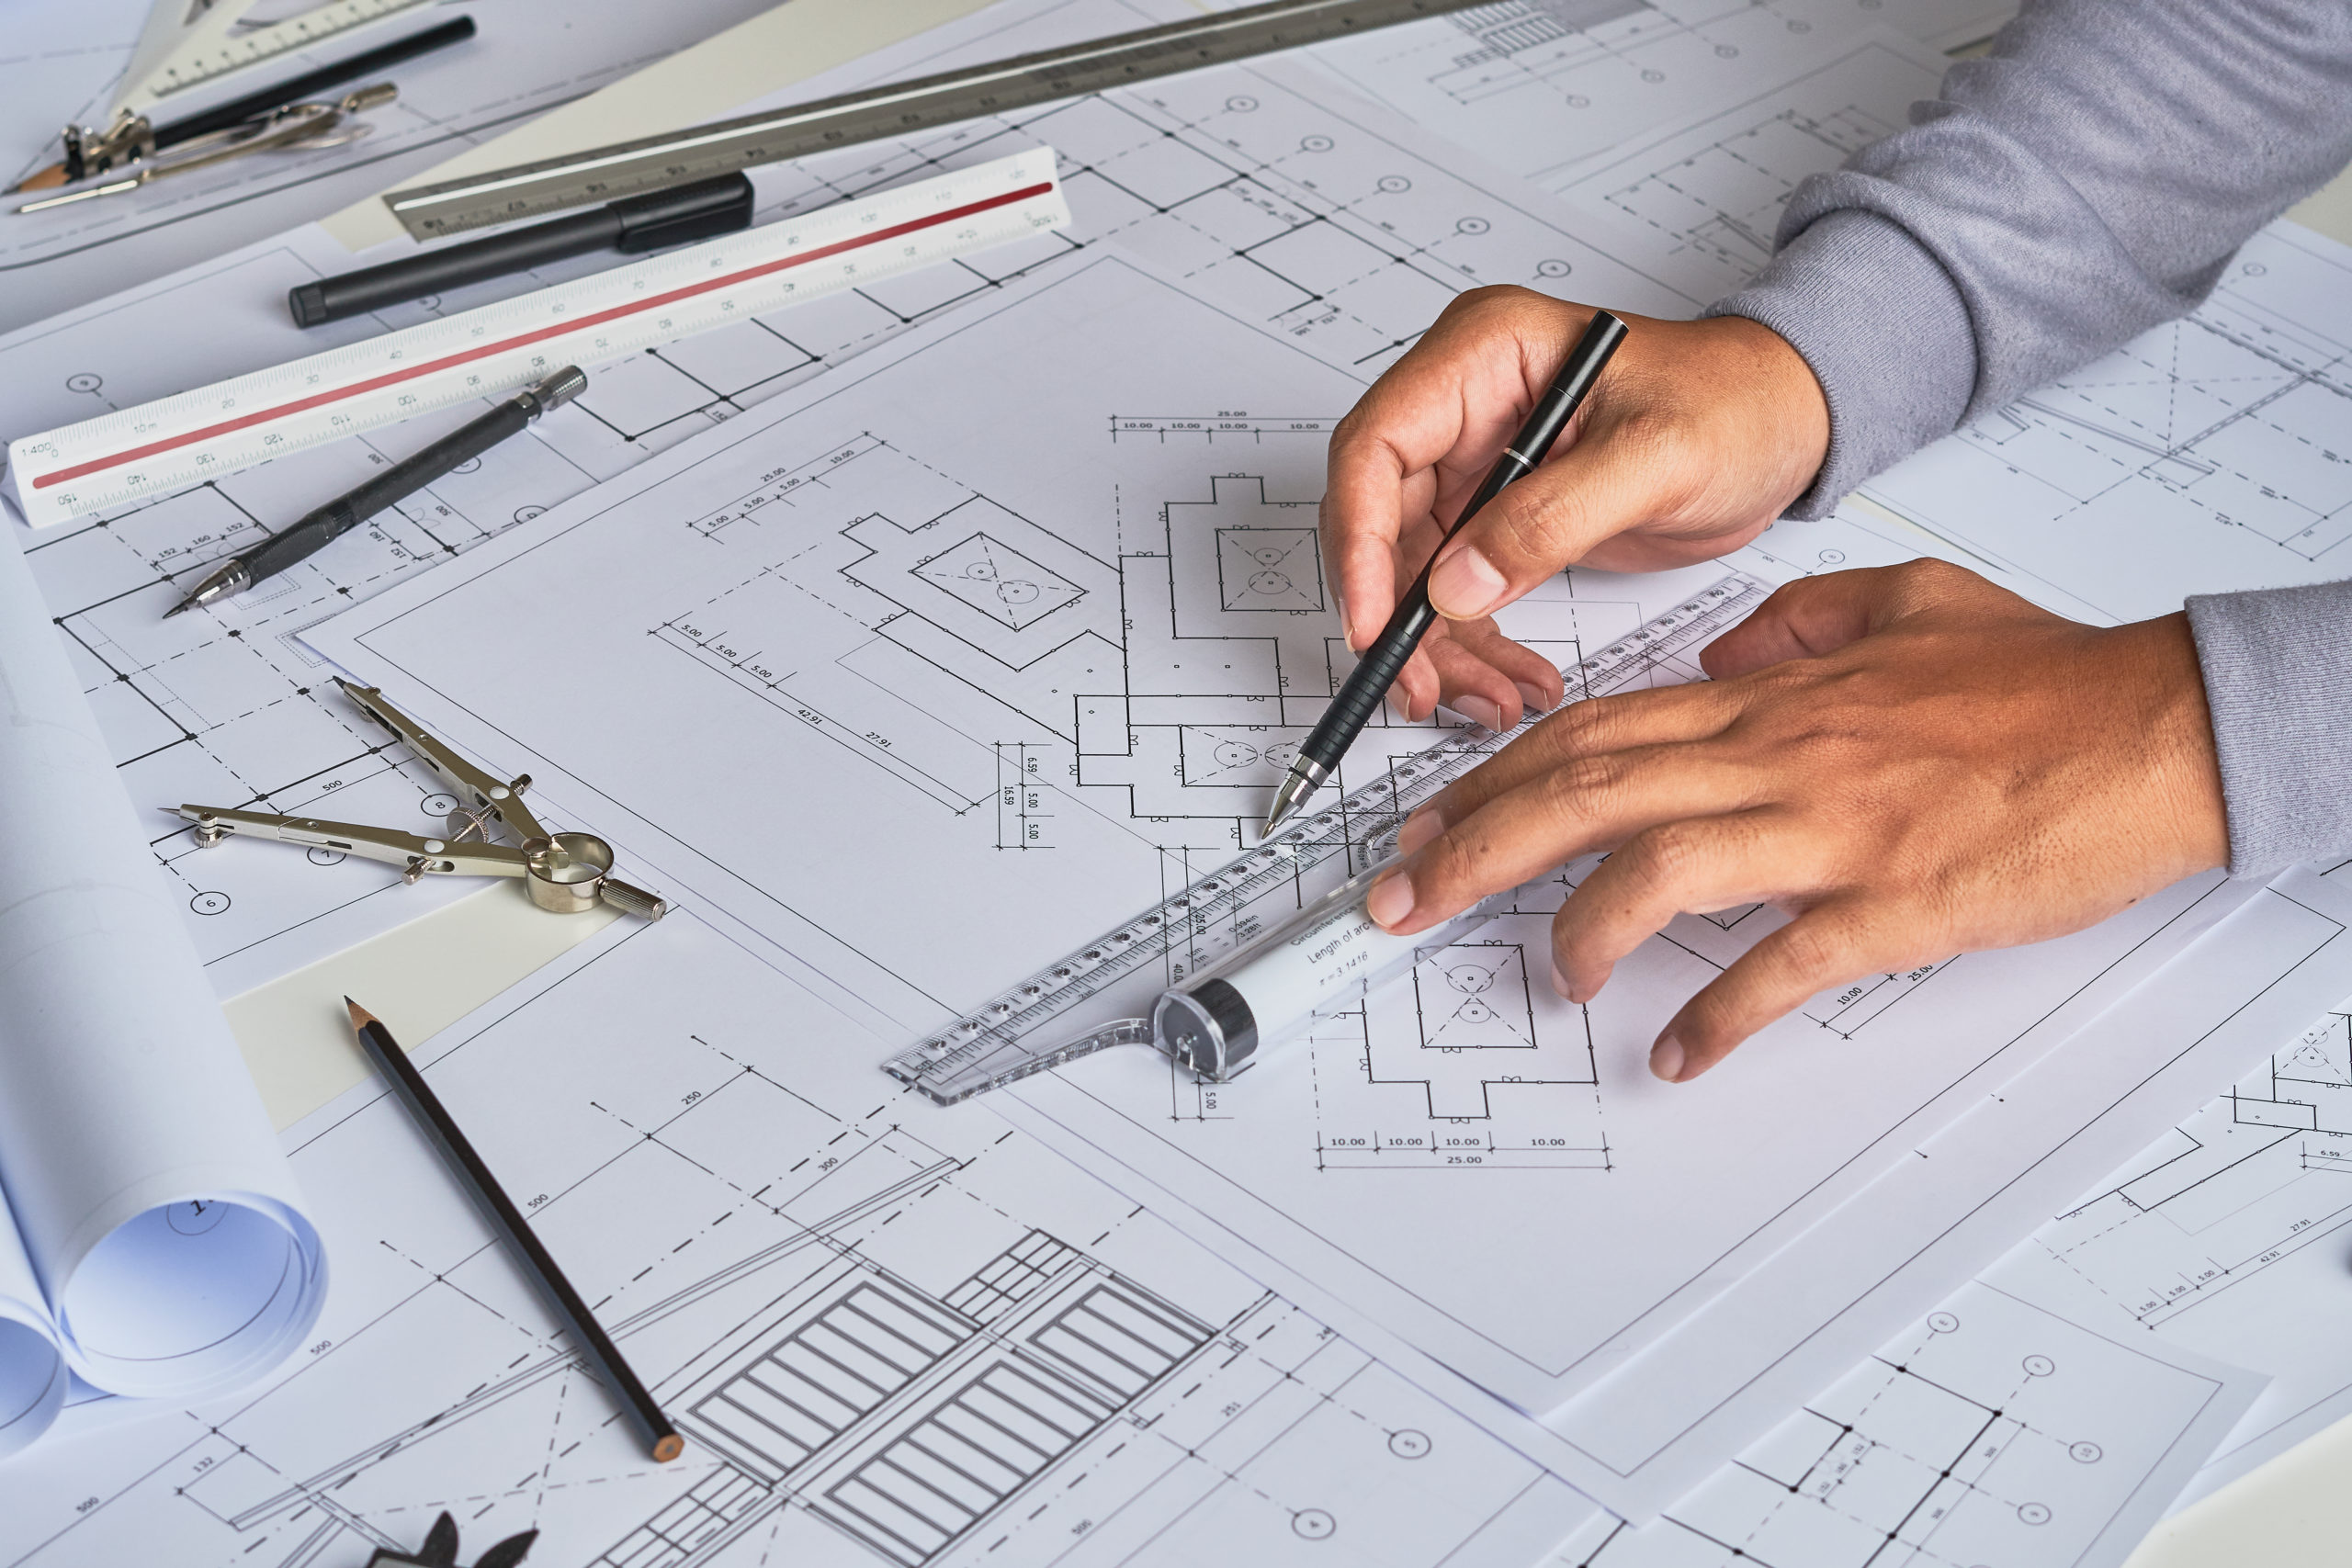 Person measuring Architect plans with ruler on table